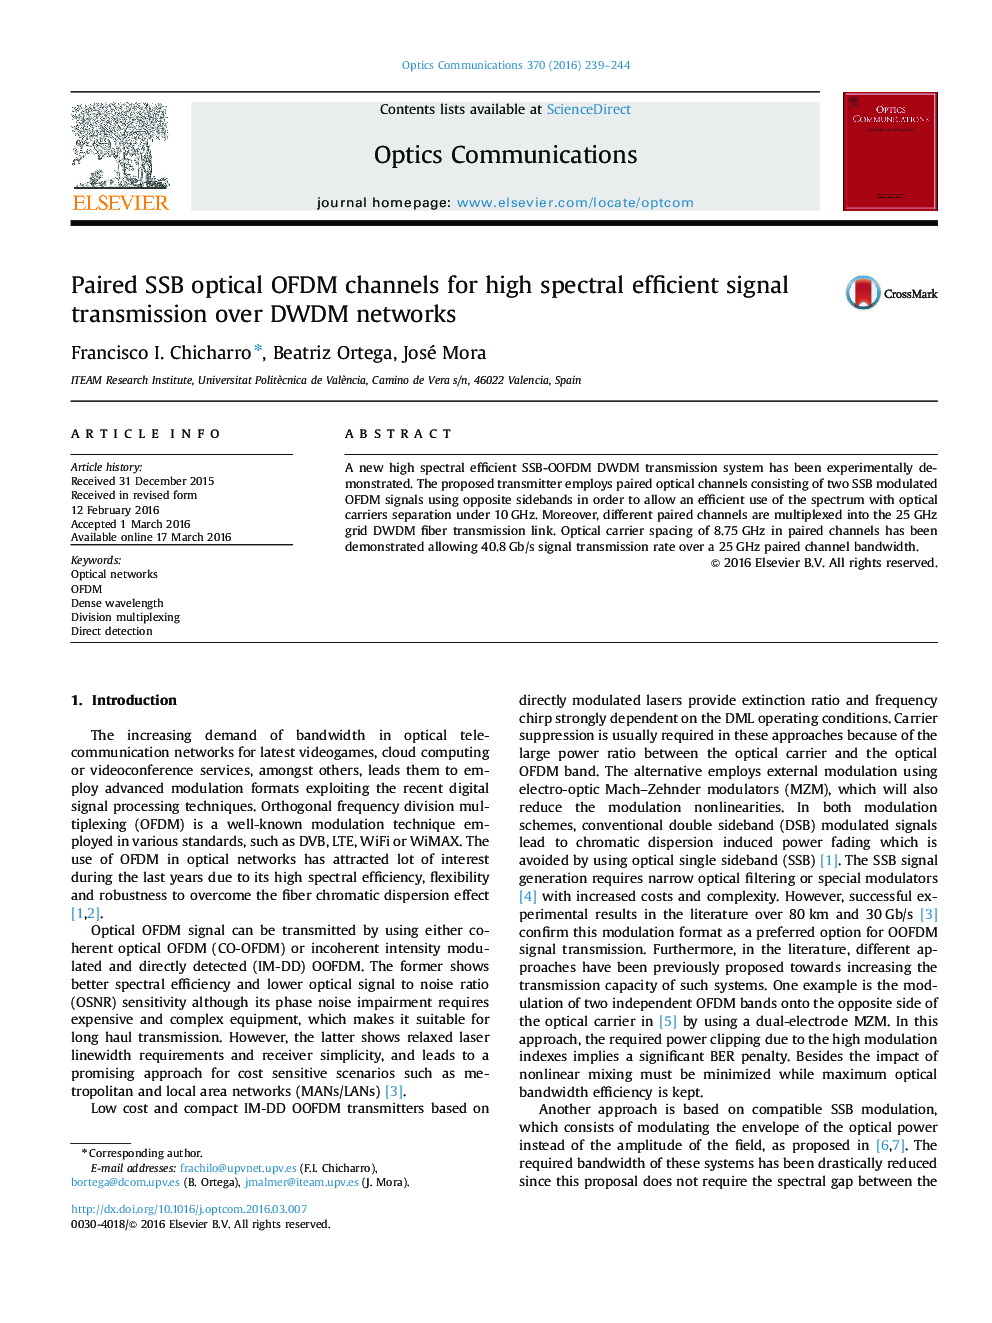 Paired SSB optical OFDM channels for high spectral efficient signal transmission over DWDM networks